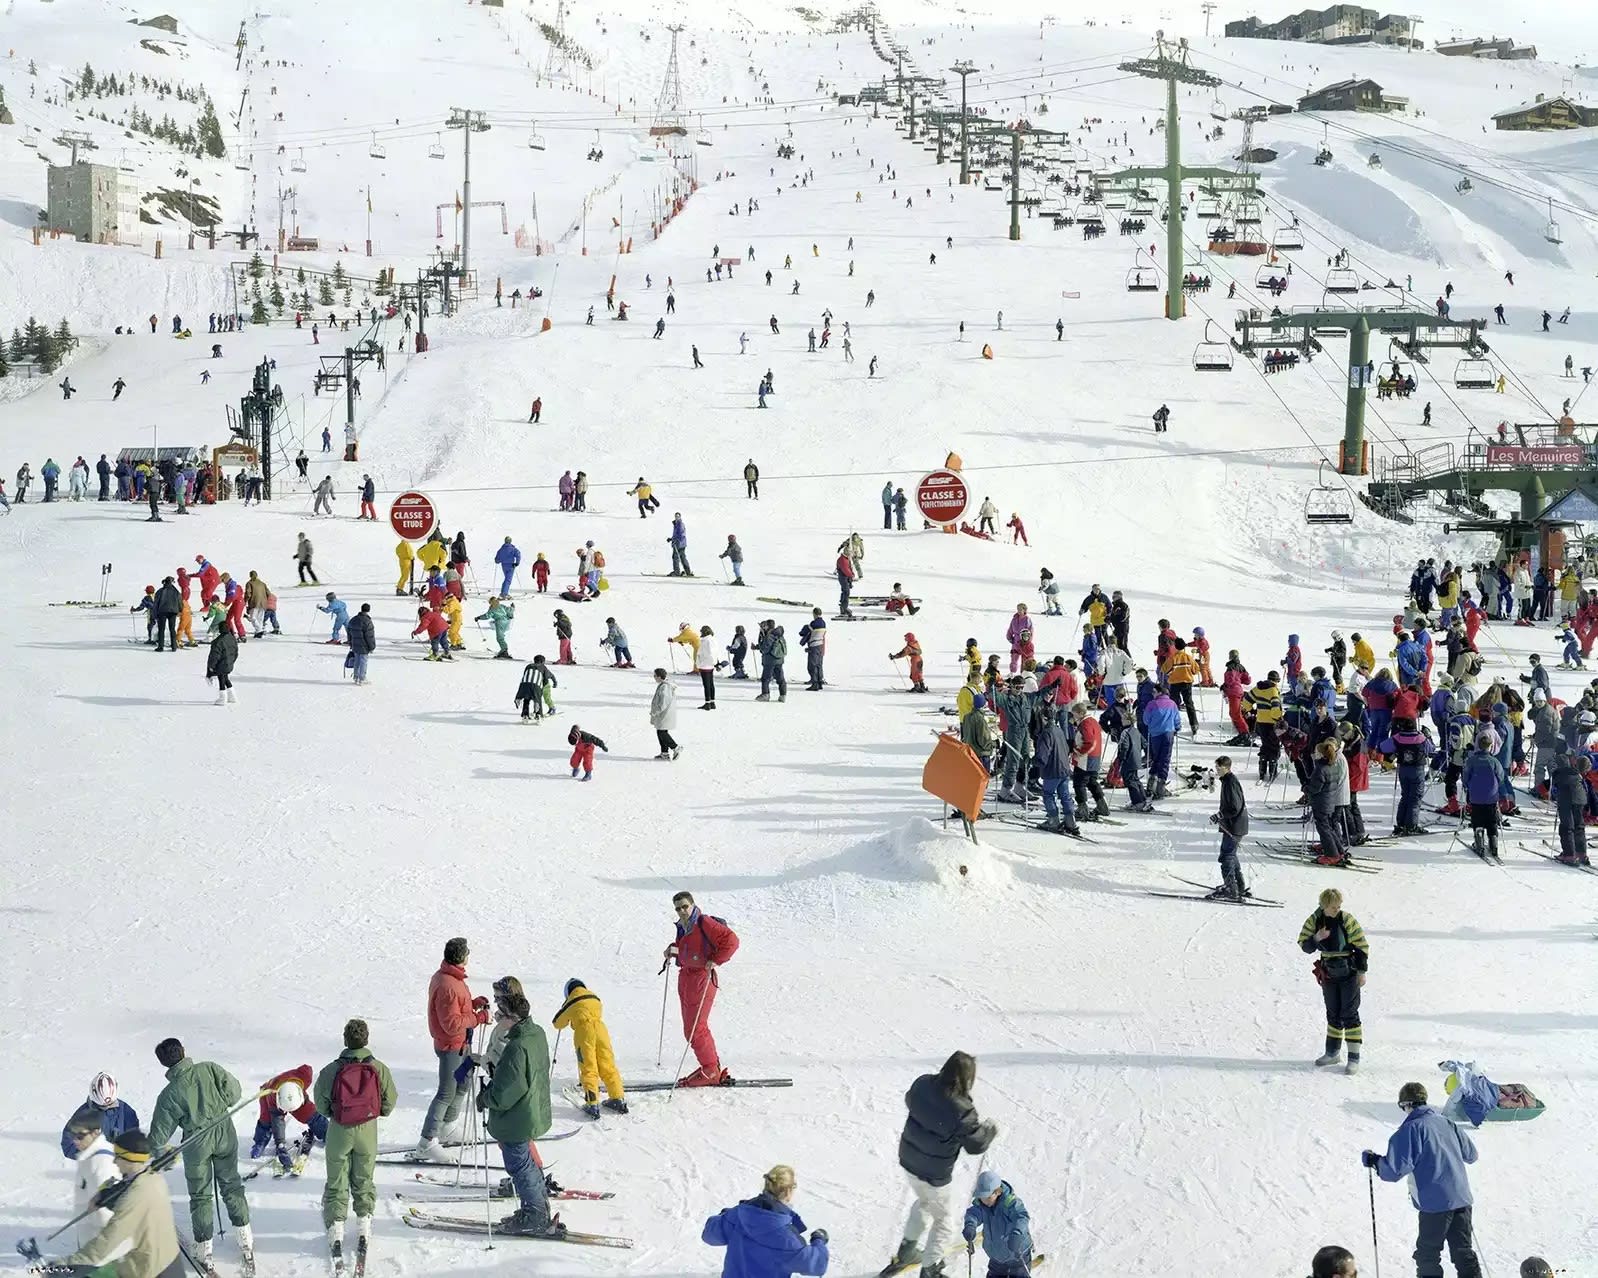 Skiiers on a mountain at Les Menuires, France, by Massimo Vitali